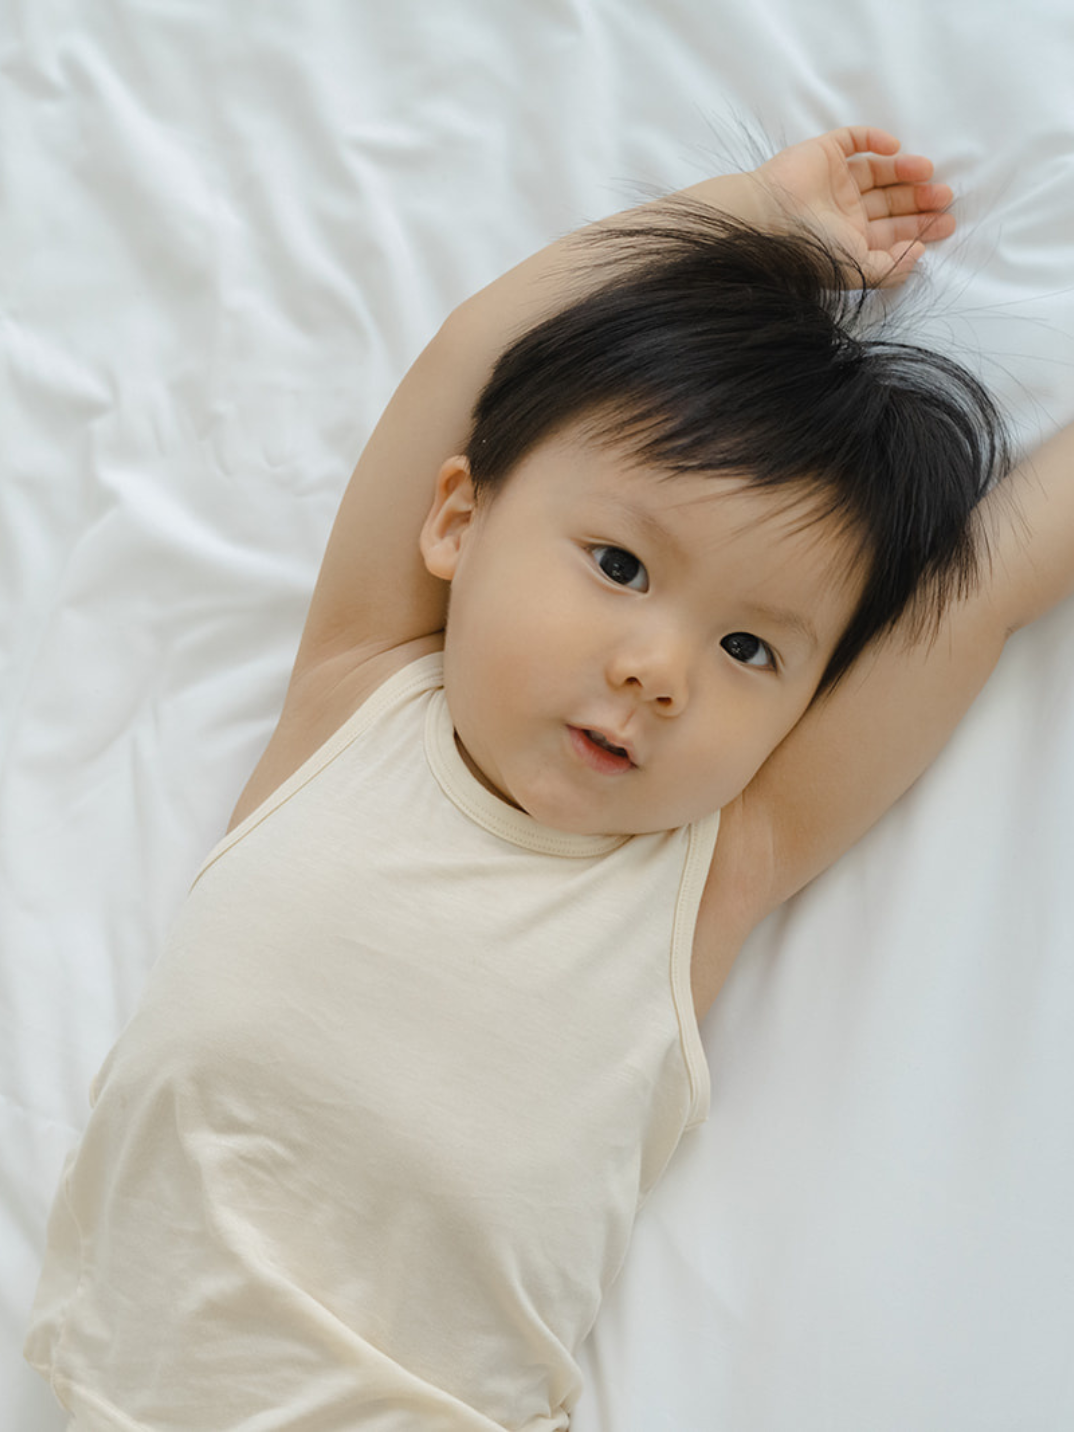 These tank tops are super soft and gentle on your little ones' skin. Designed with a loose, unisex fit for play, movement and a comfy night's rest. Wear the breathable layer under garments for day or snooze in the ultimate comfort. Made with modal interwoven with eco-soft technology. Comes with: 2x cream tank tops.